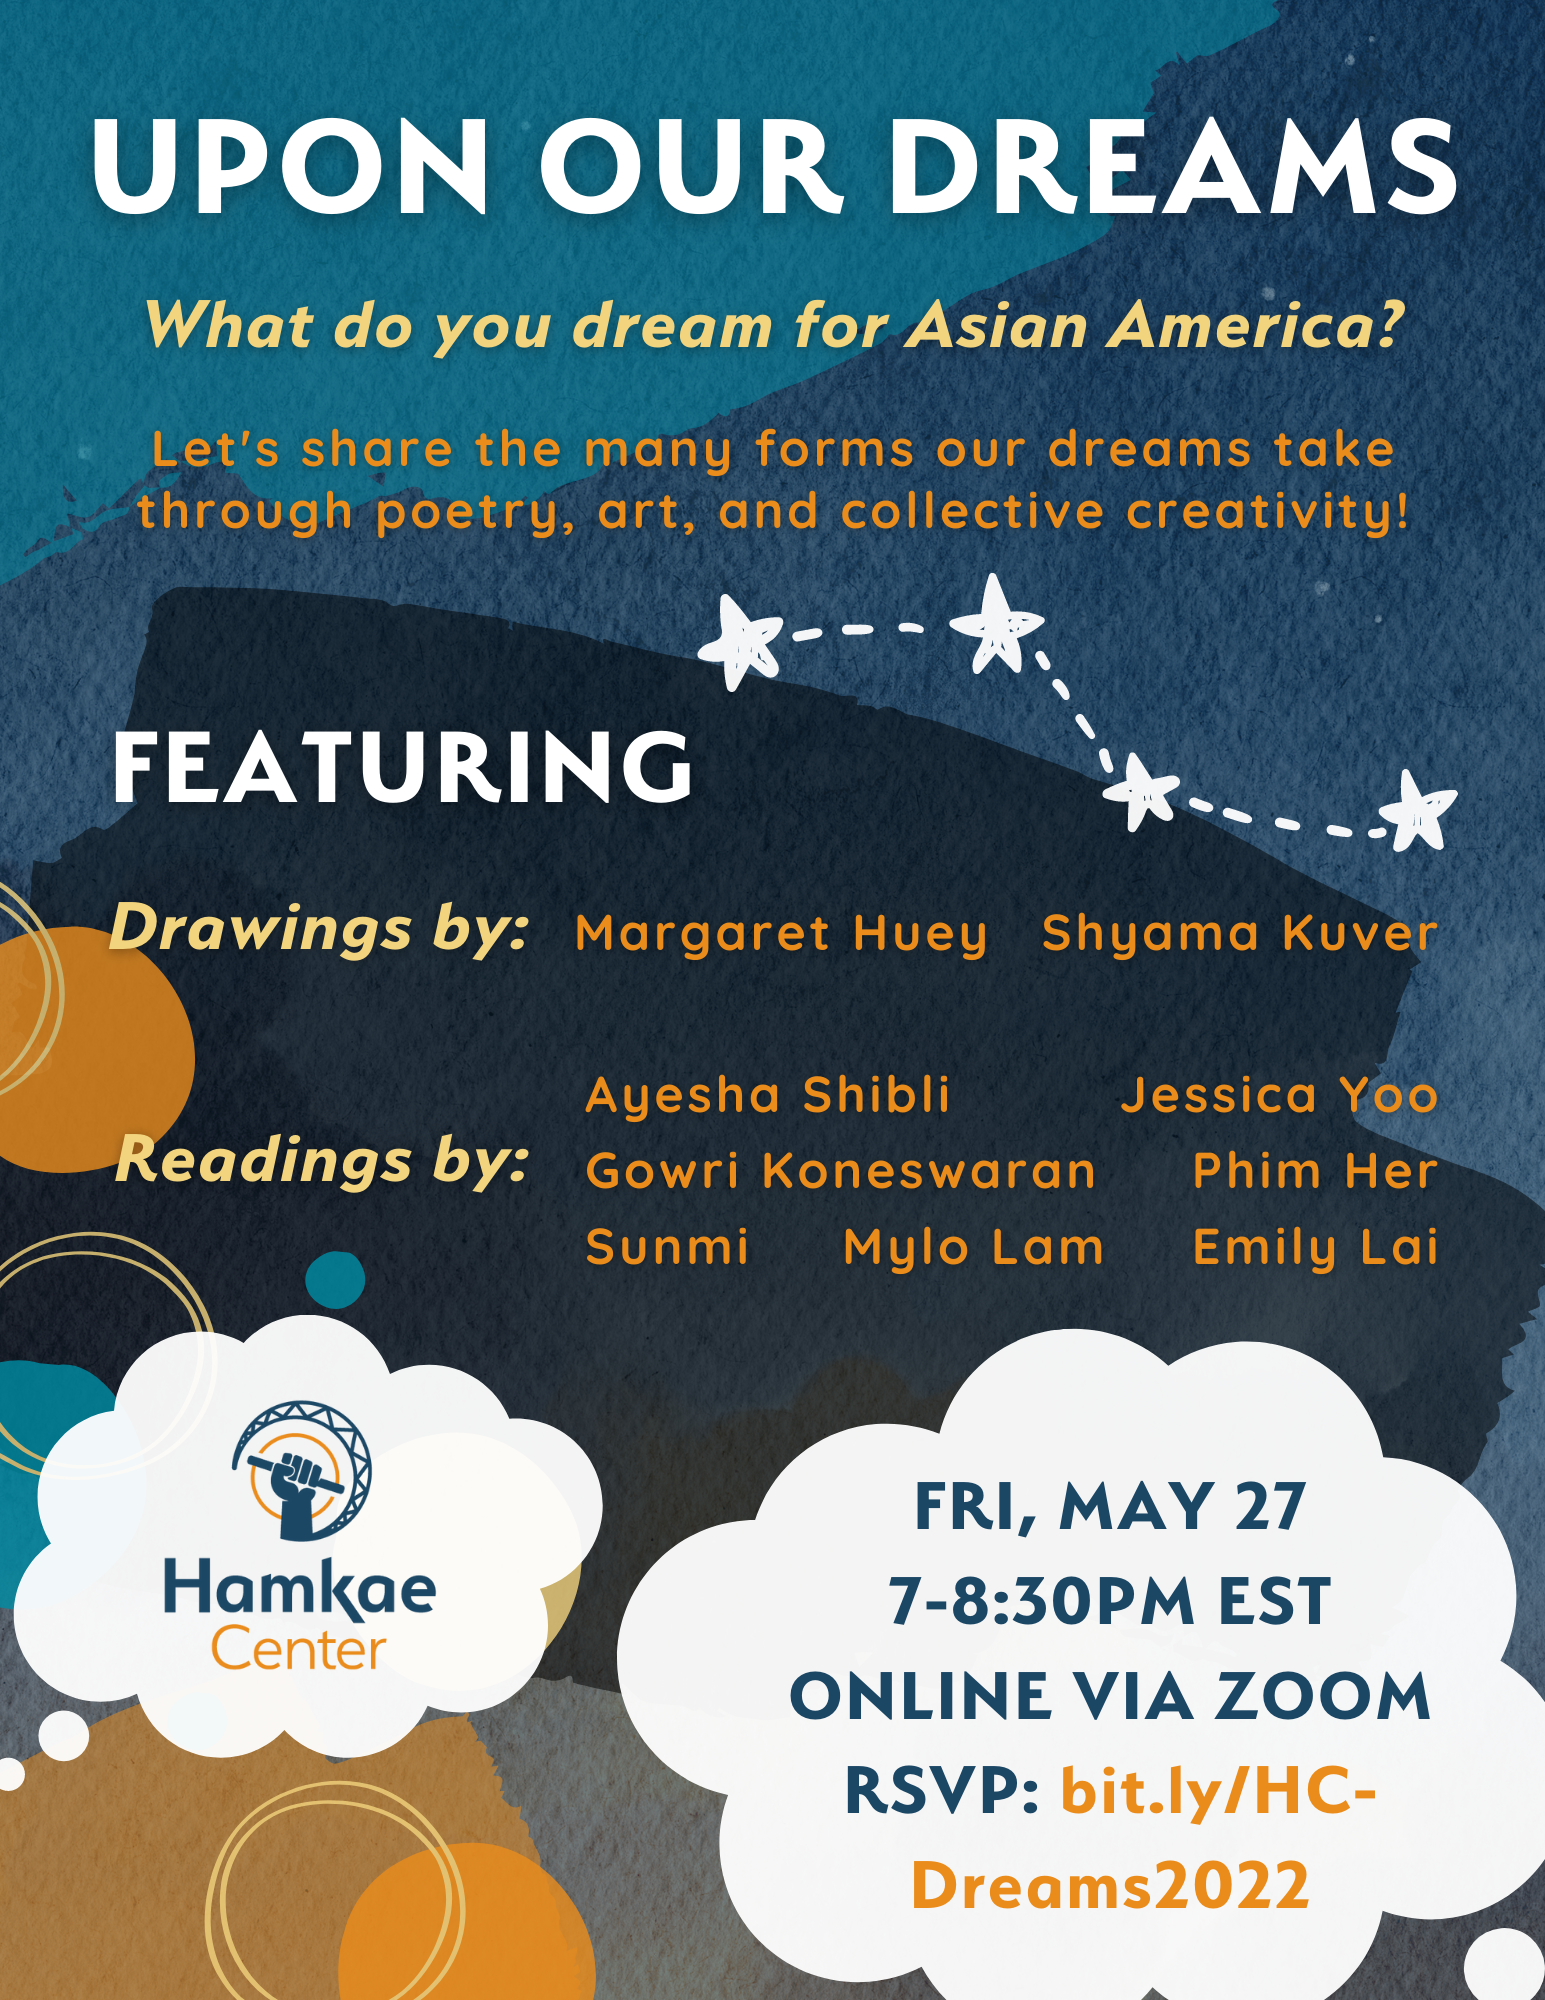 Upon Our Dreams: What do you dream for Asian America?